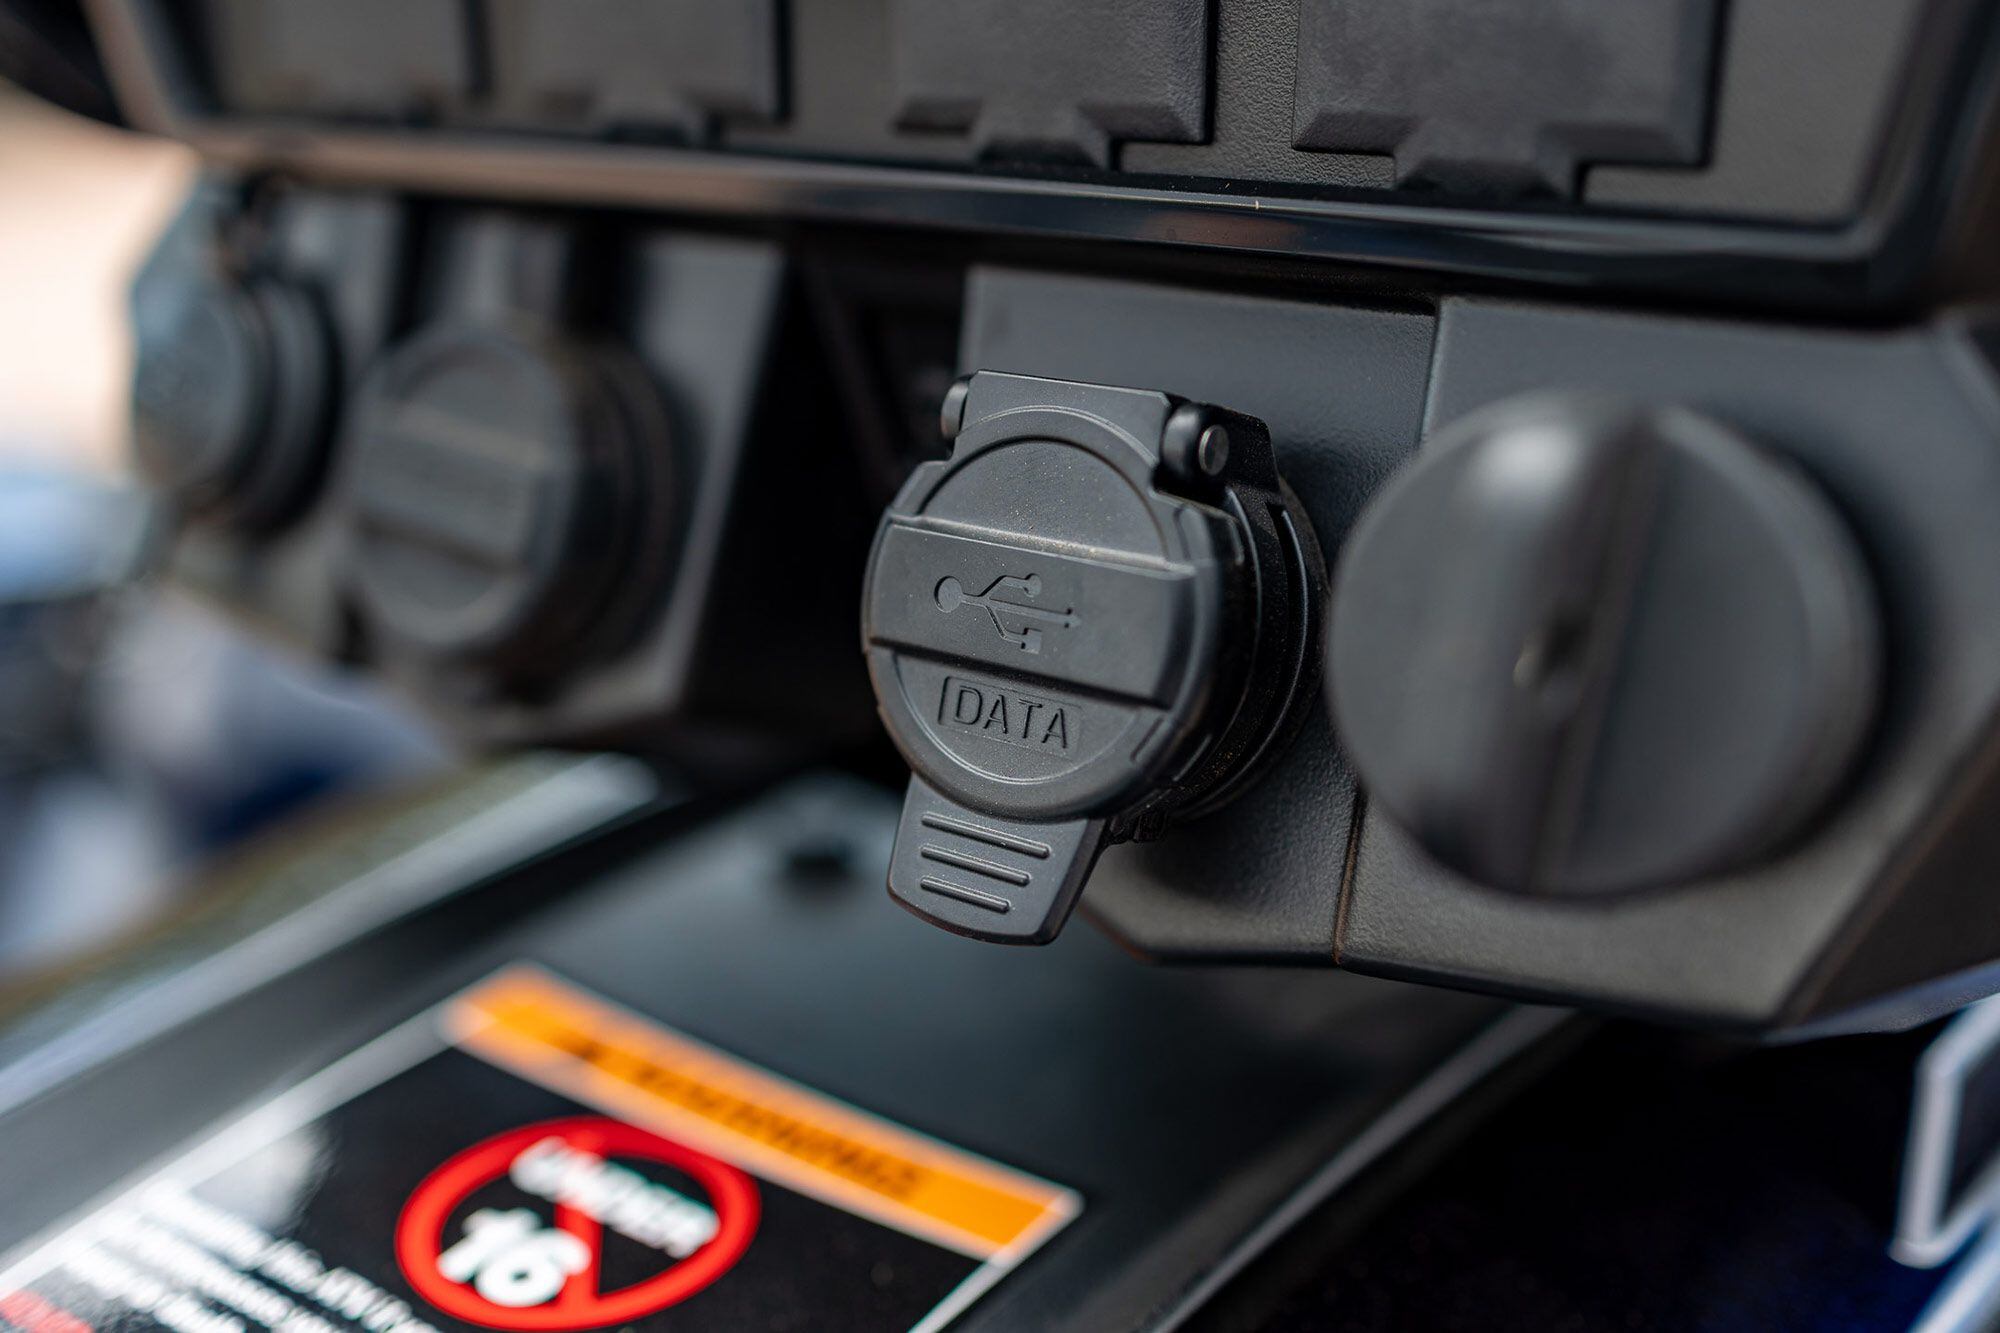 A 12-volt power socket, battery charger connector, and data port can be accessed below the Ride Command display.